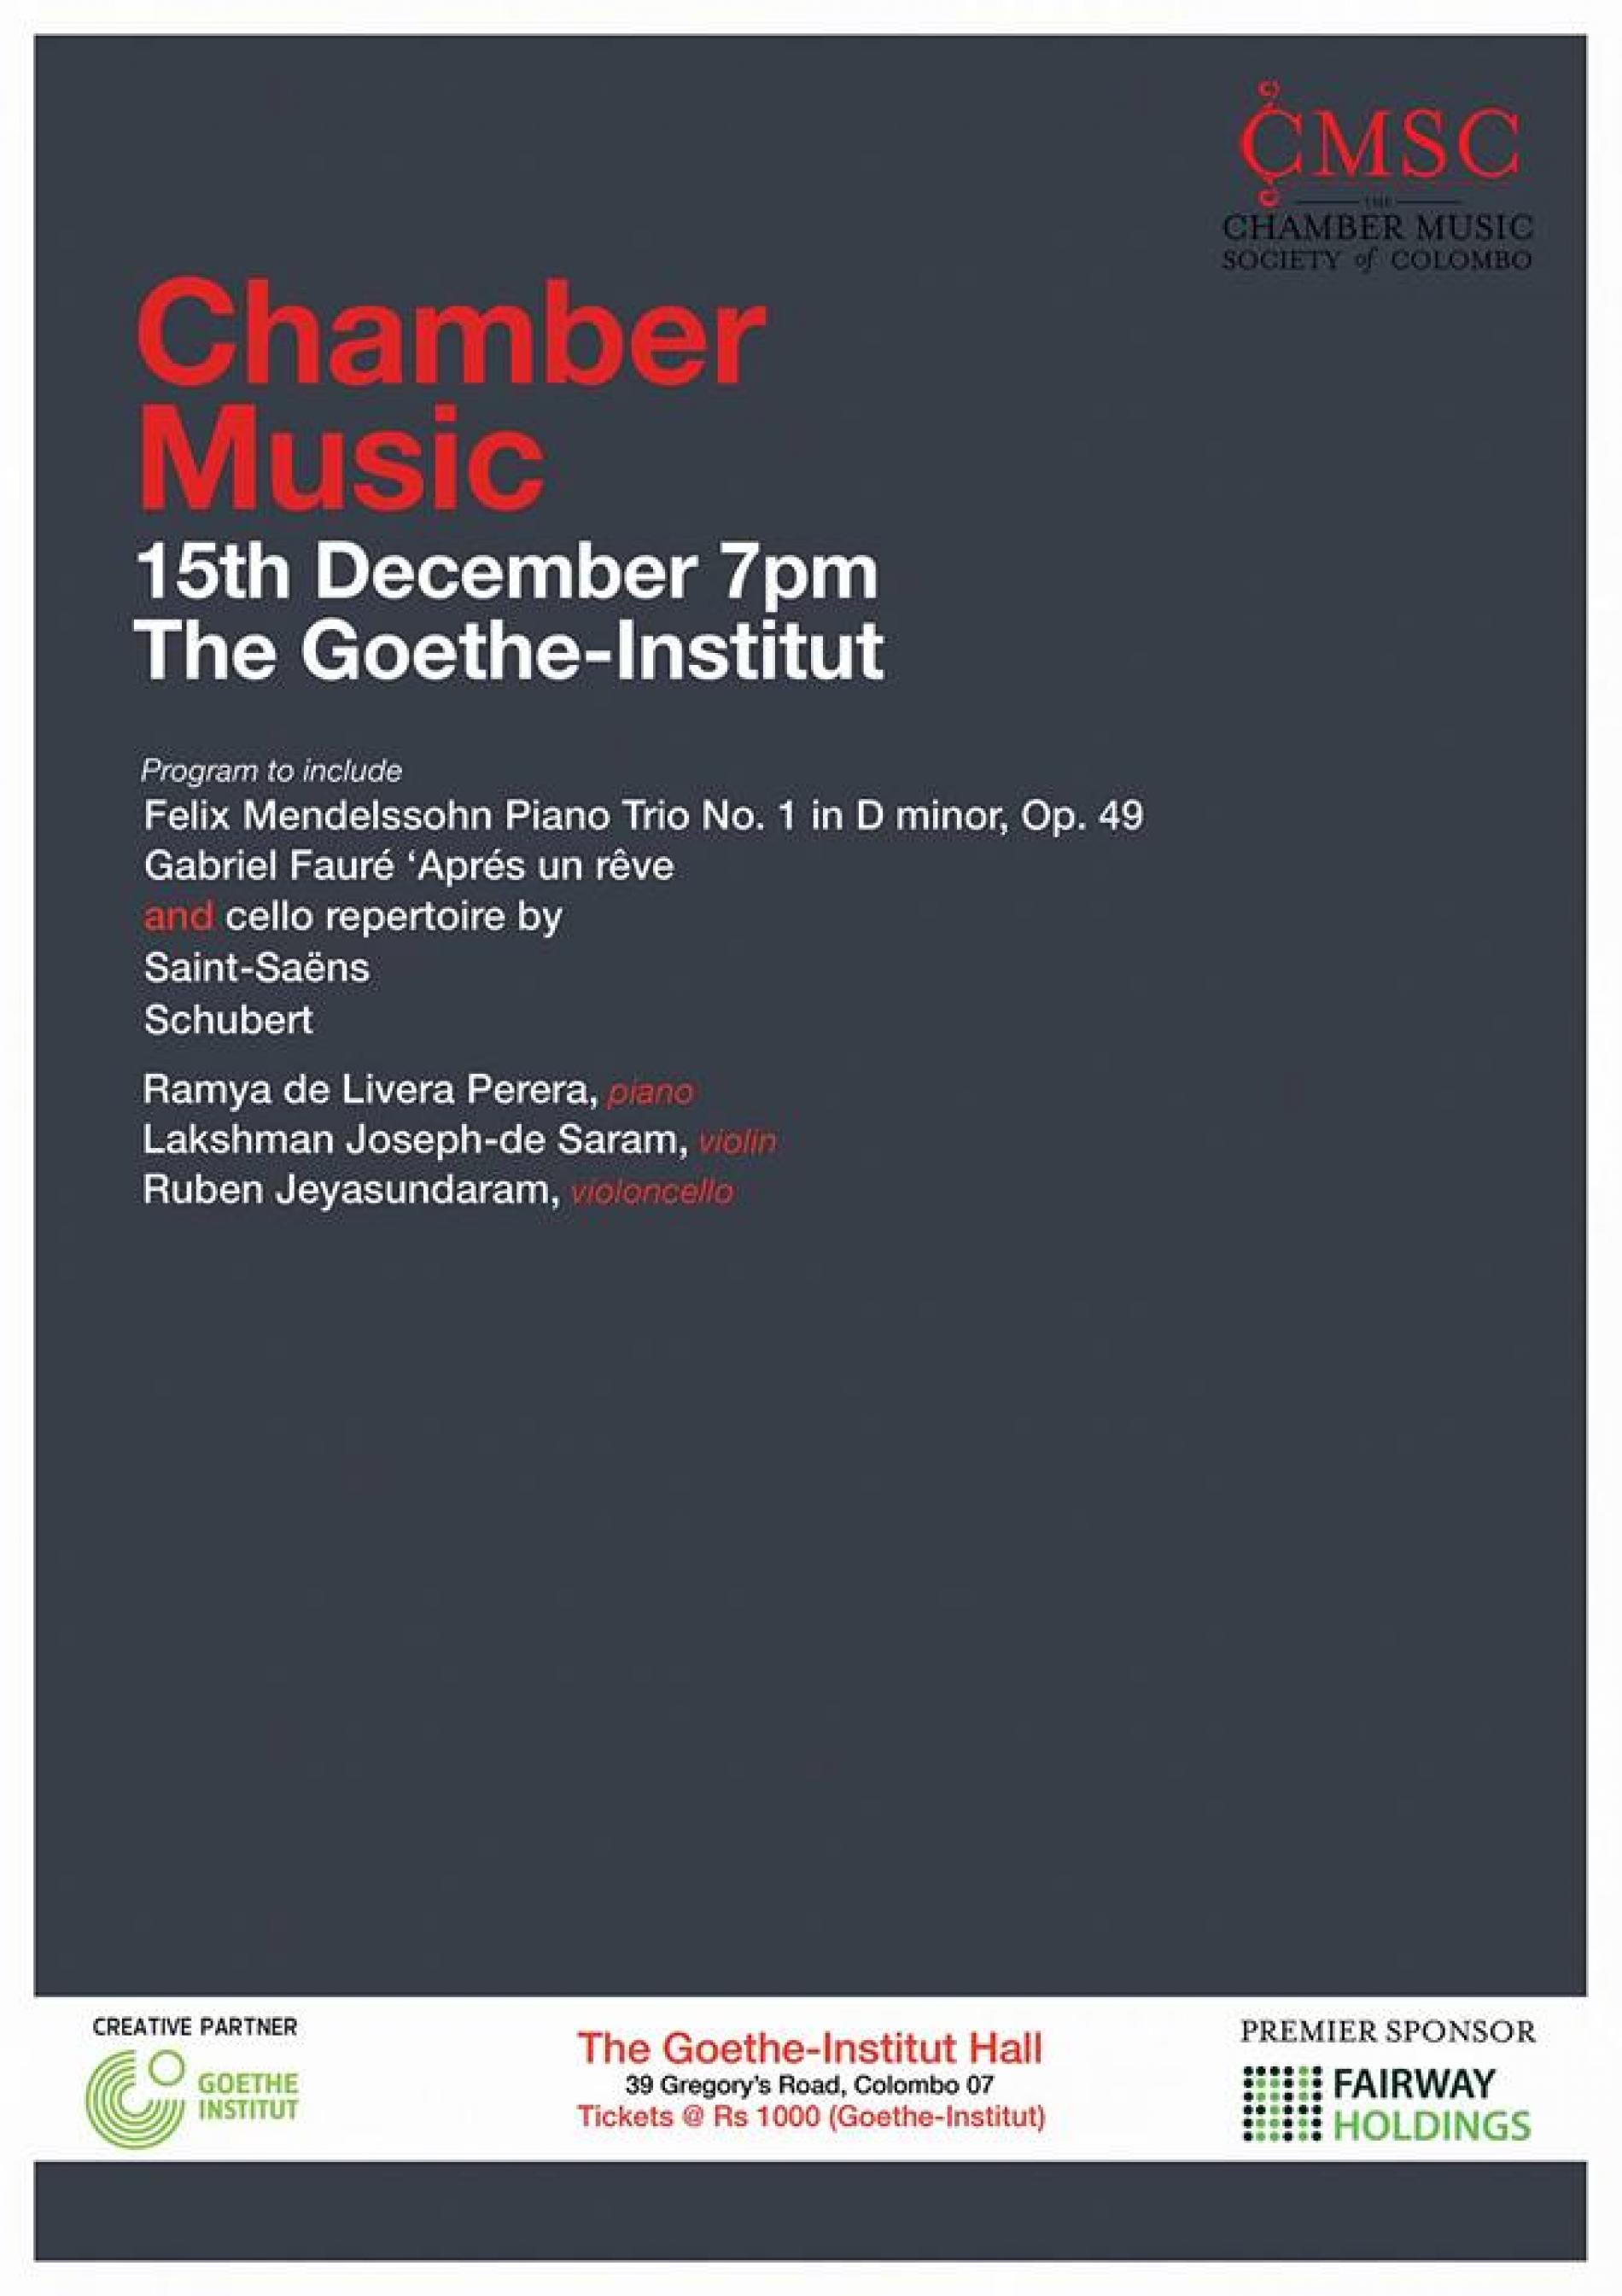 Chamber Music at the Goethe-Institute.